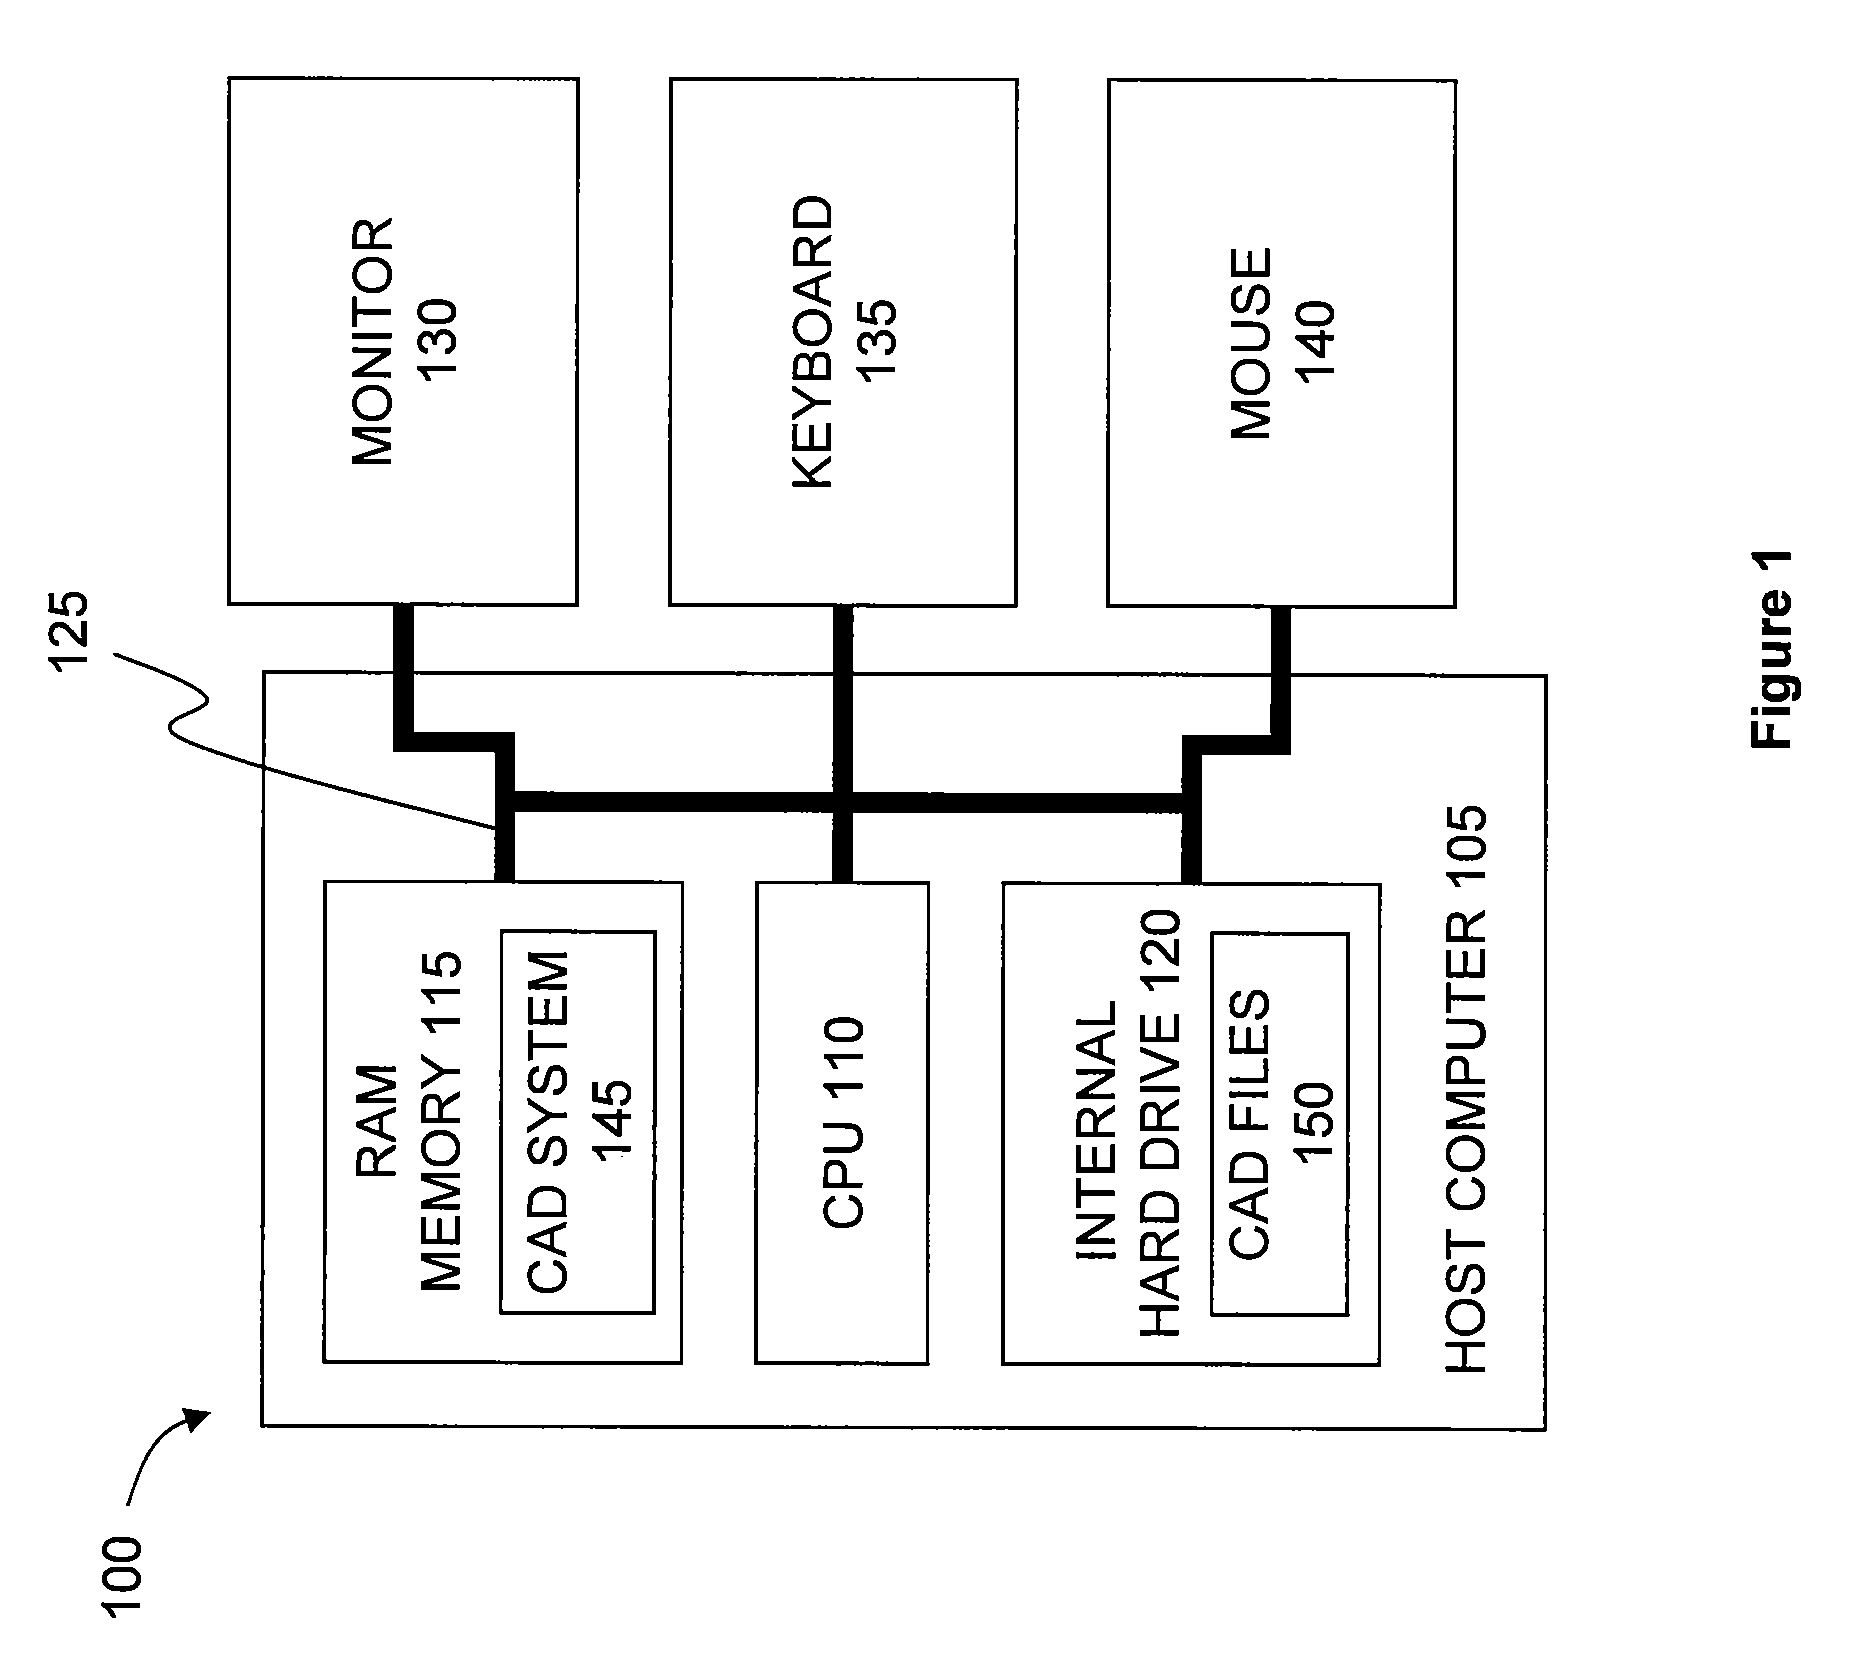 Method for validating features in a direct modeling paradigm